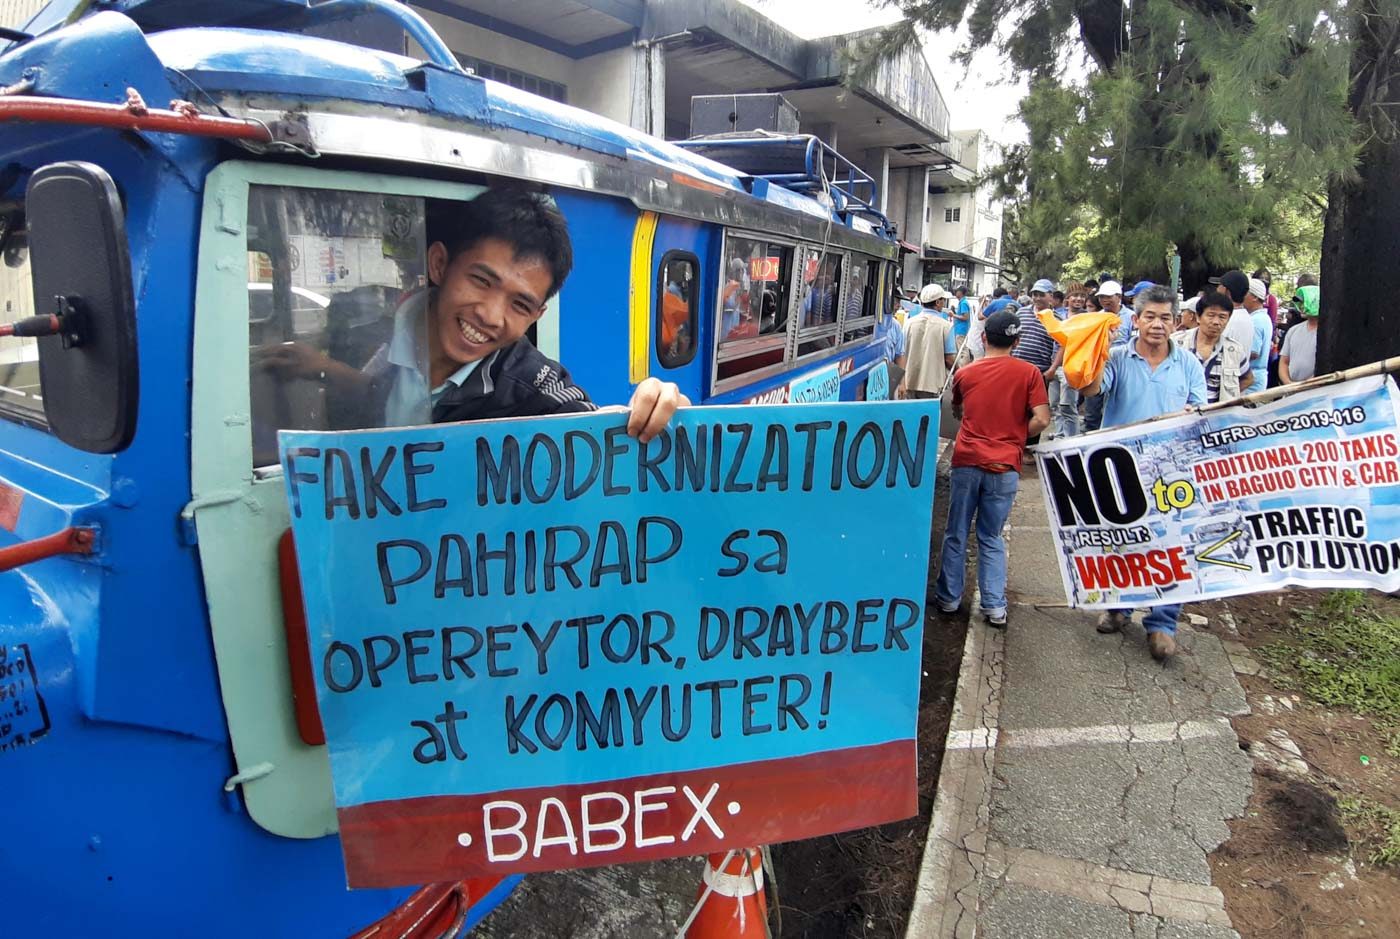 PUV modernization gets no budget in 2020: Who suffers?